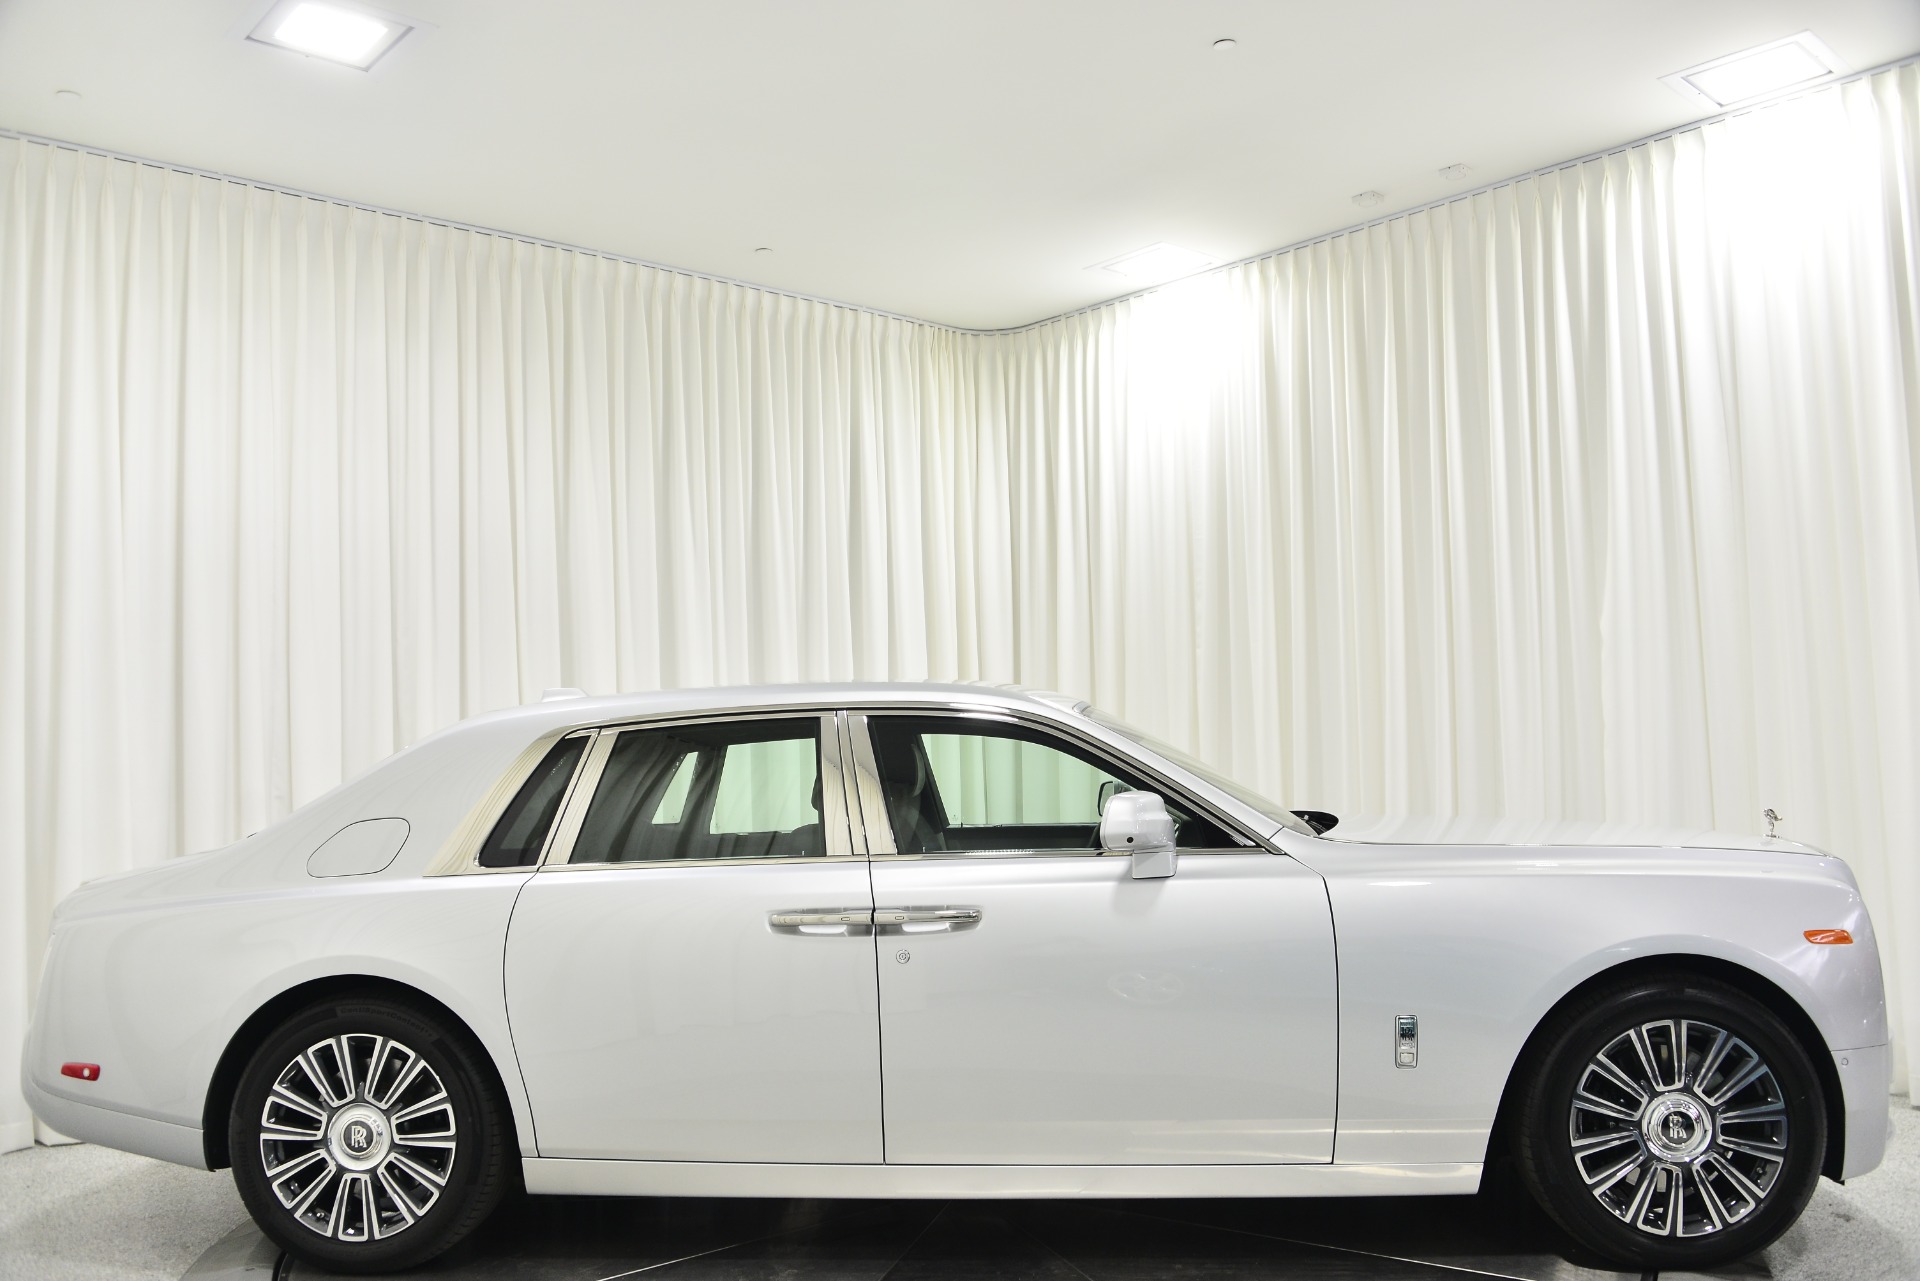 2020 RollsRoyce Ghost for Sale with Photos  CARFAX